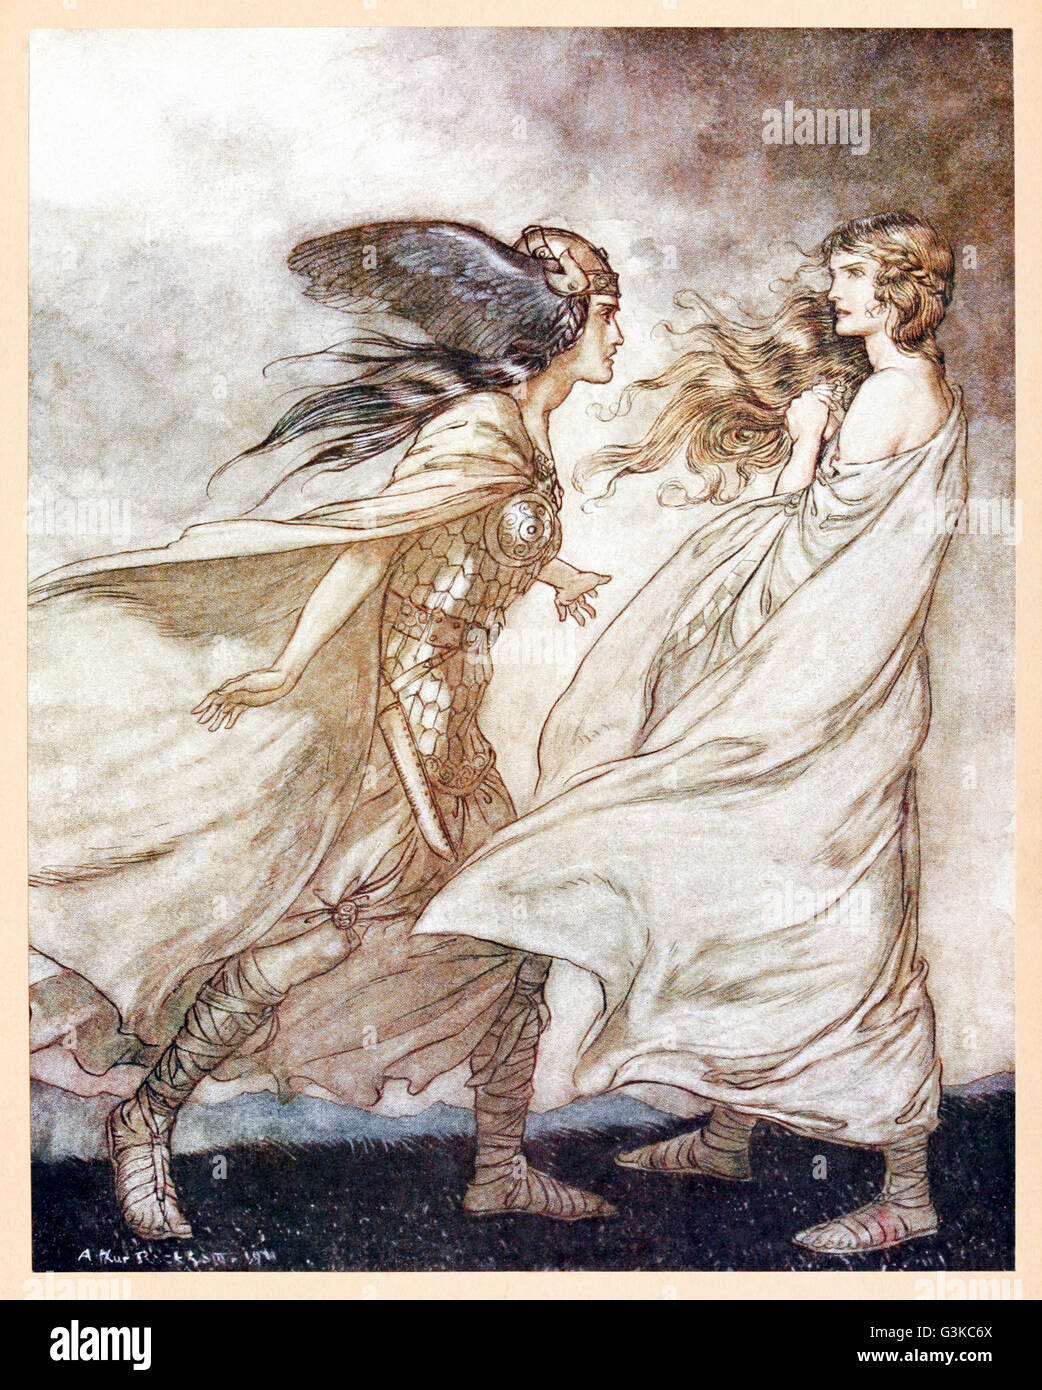 “The ring upon thy hand - …ah, be implored! For Wotan fling it away!” from 'Siegfried & The Twilight of the Gods' illustrated by Arthur Rackham (1867-1939). See description for more information. Stock Photo